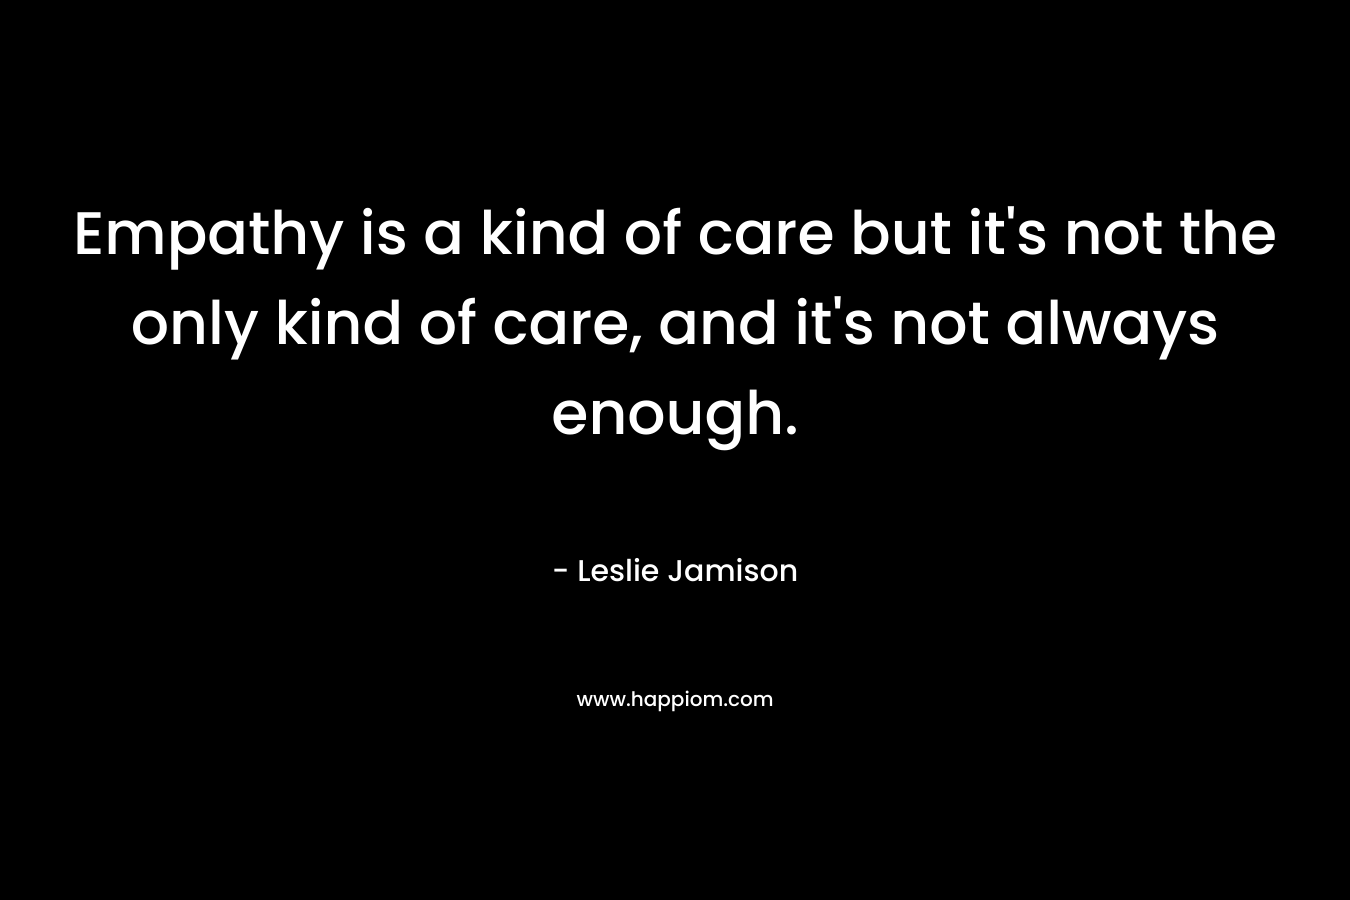 Empathy is a kind of care but it’s not the only kind of care, and it’s not always enough. – Leslie Jamison